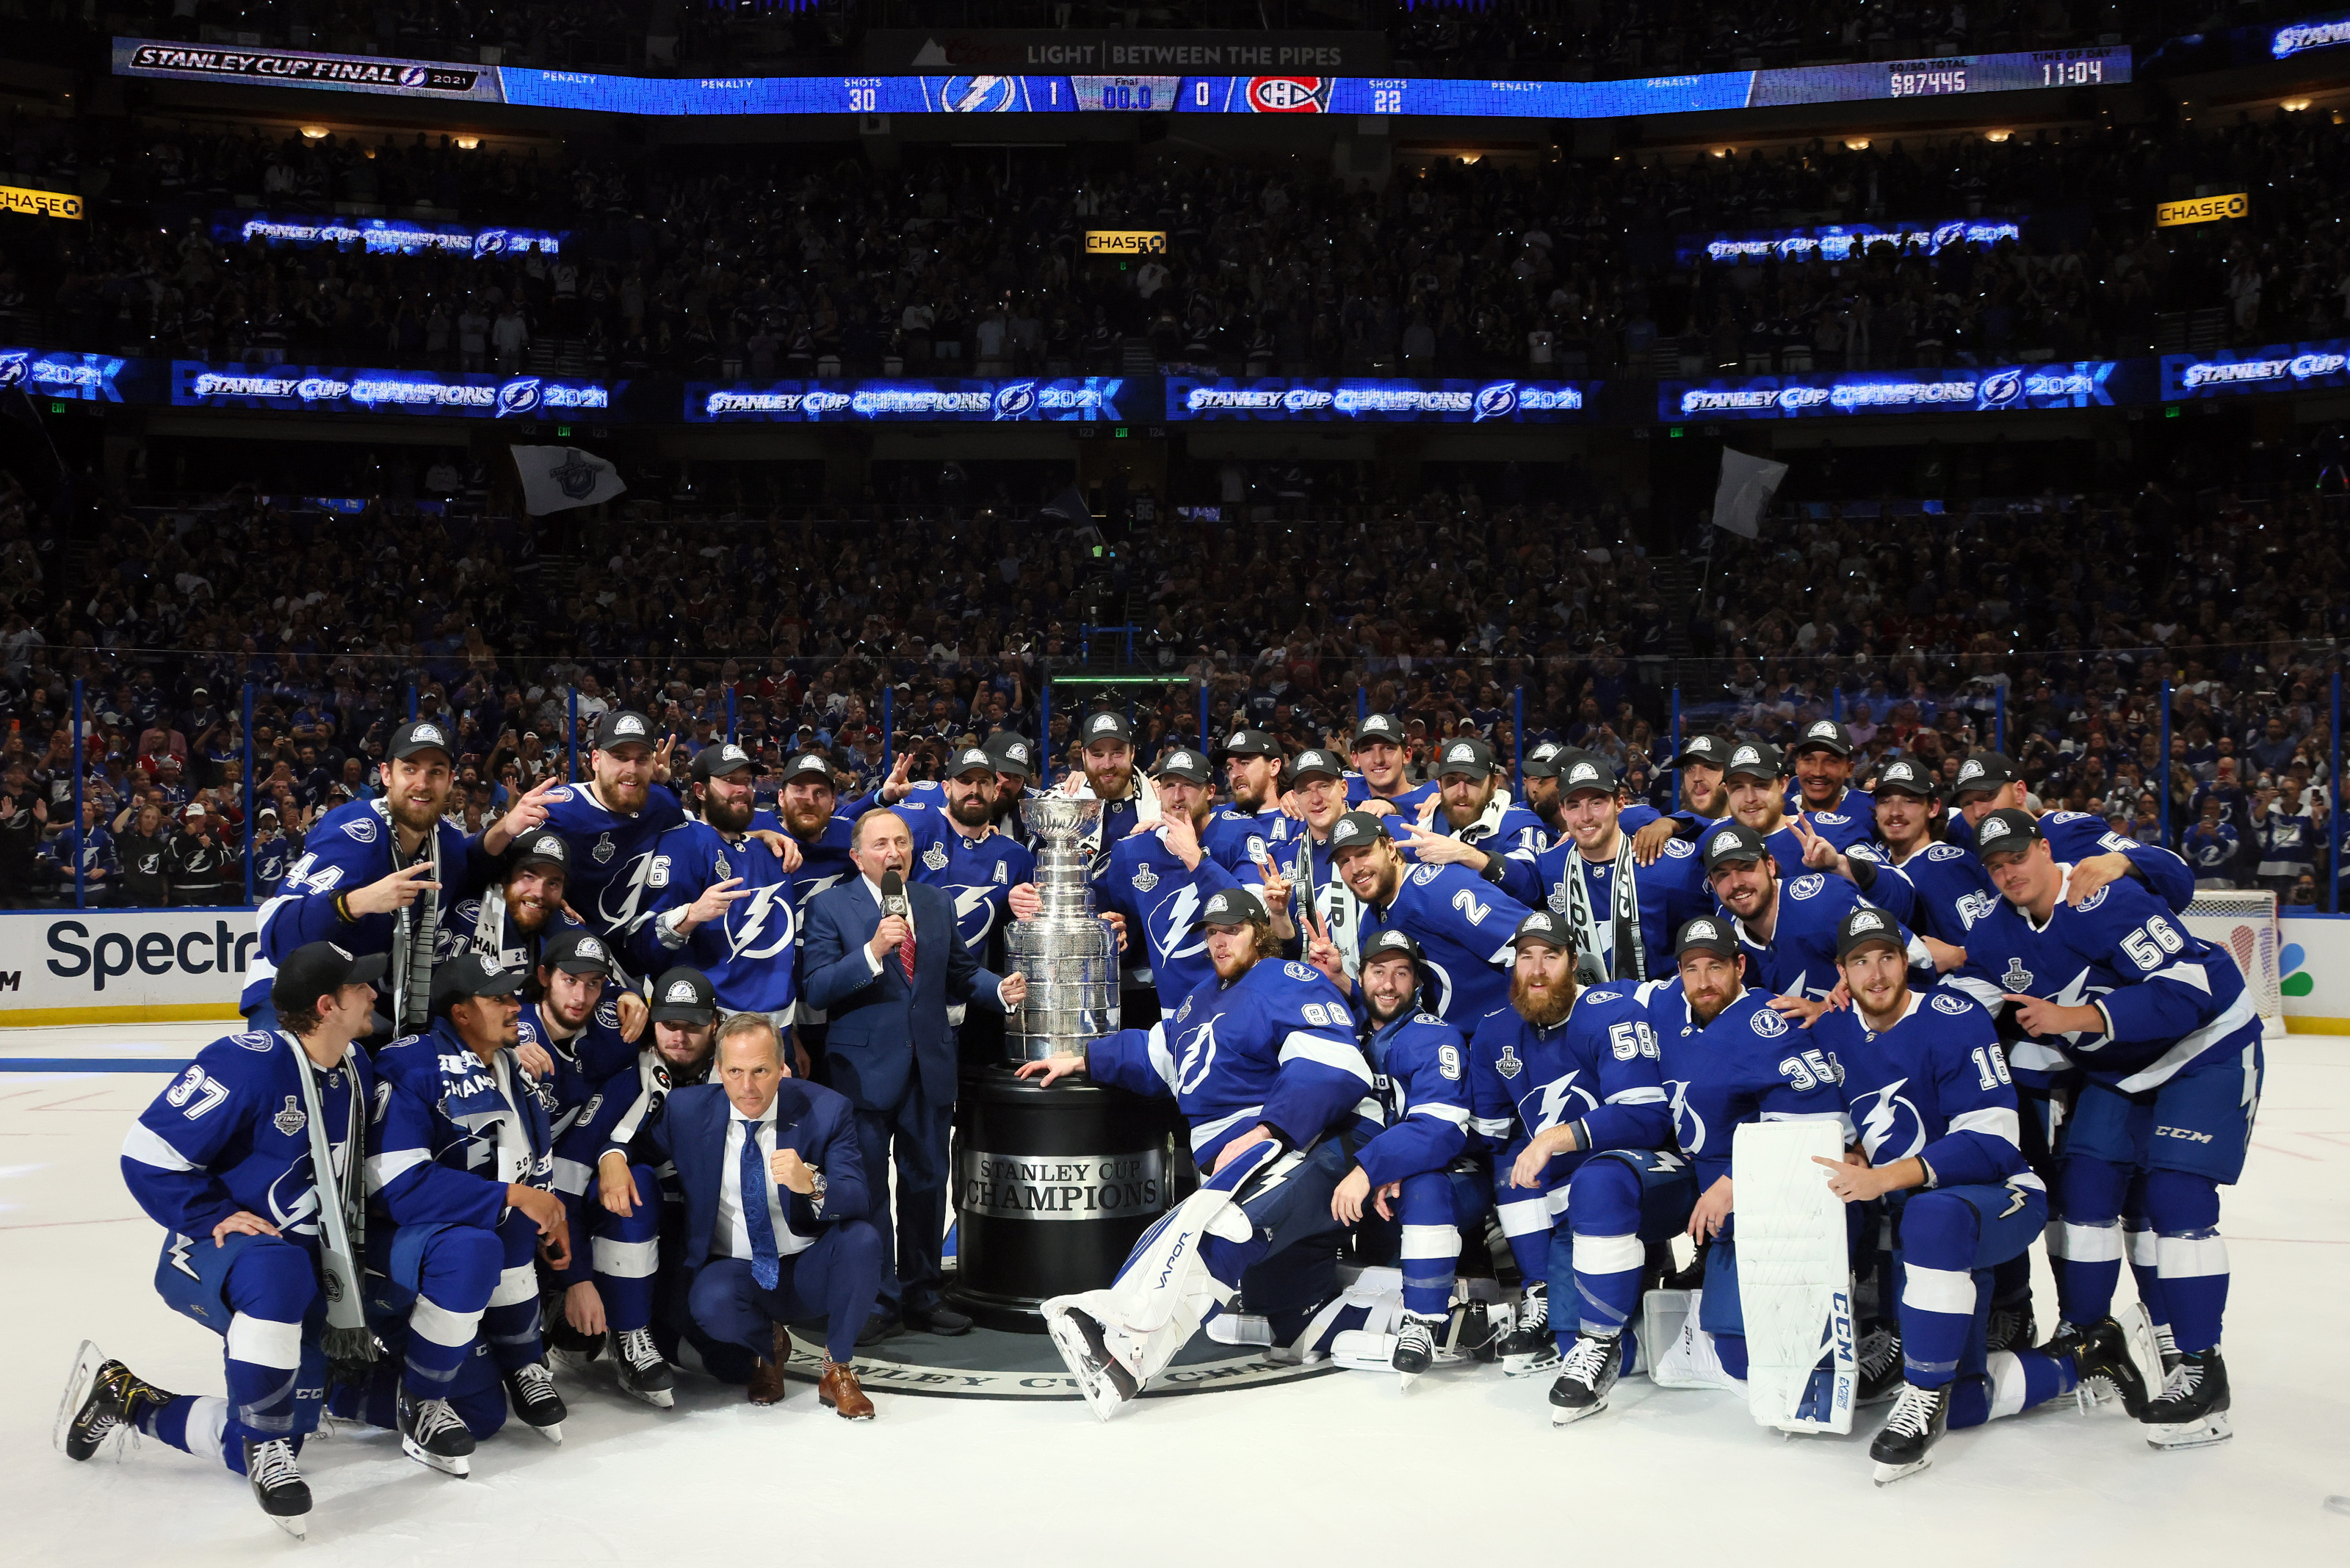 Where are 2004 Tampa Bay Lightning Stanley Cup champions now?